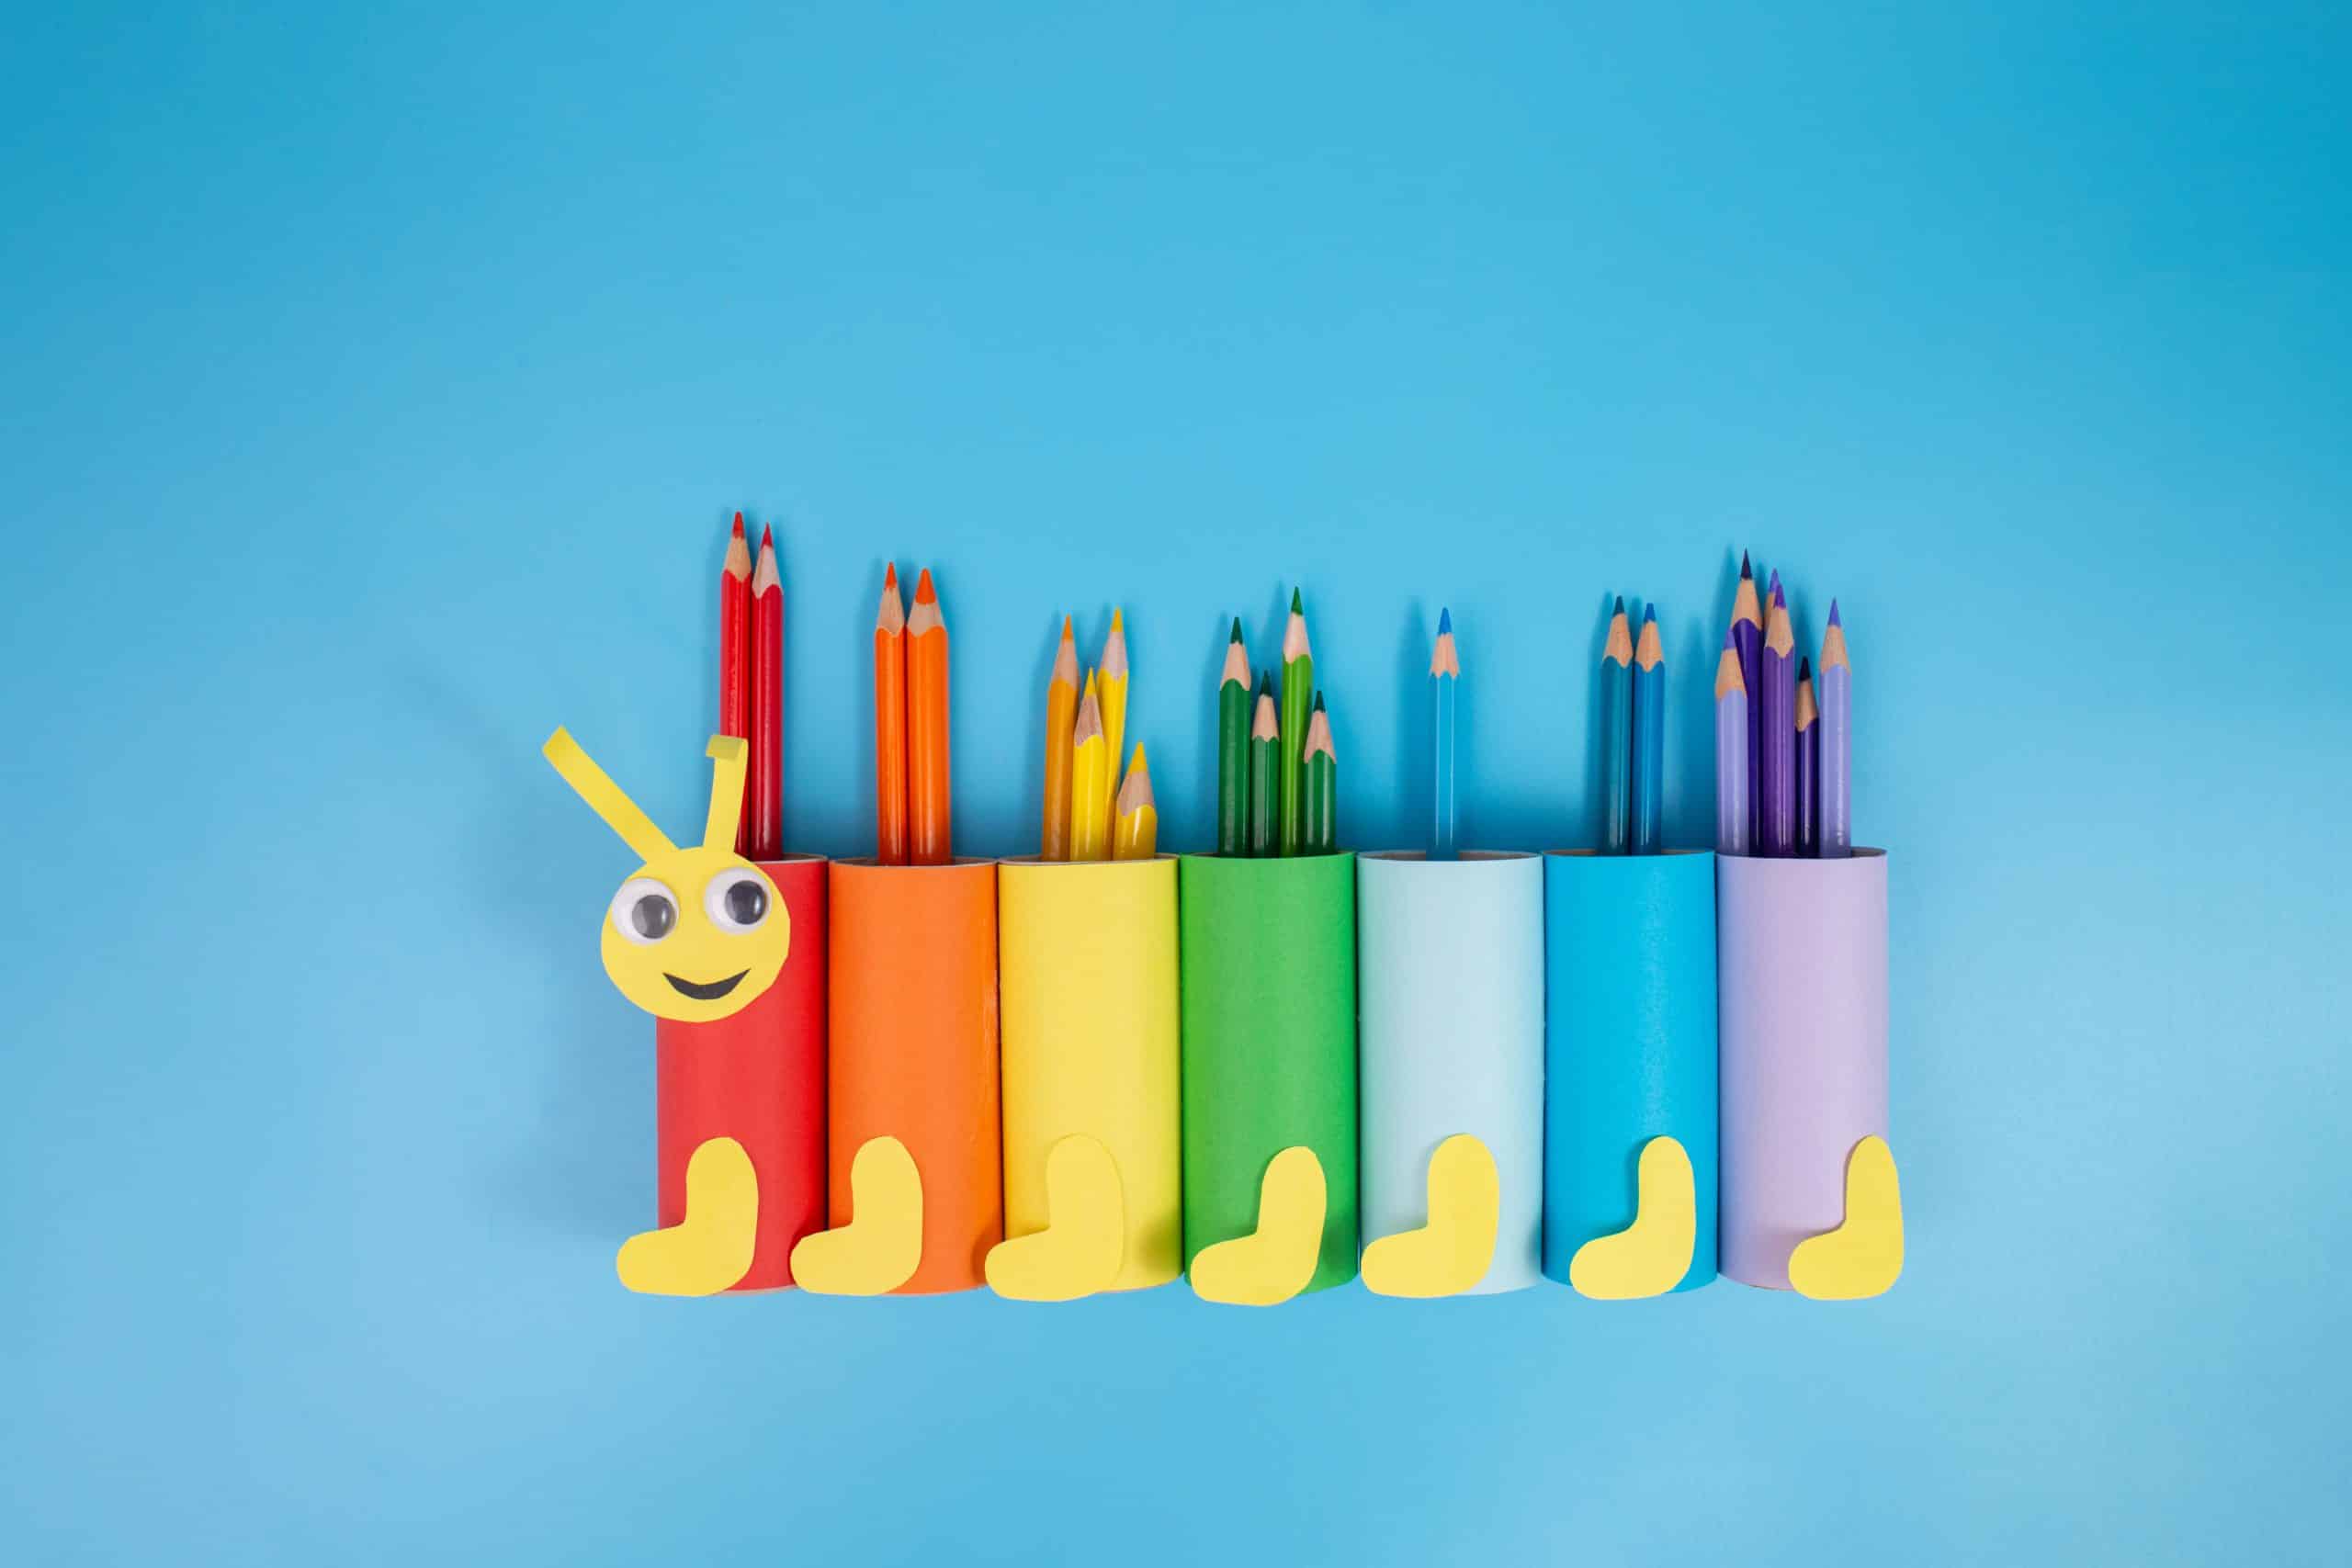 simple activity for kids, toilet paper roll craft, rainbow caterpillar figurine holder for pencils, reuse and recycled material concept